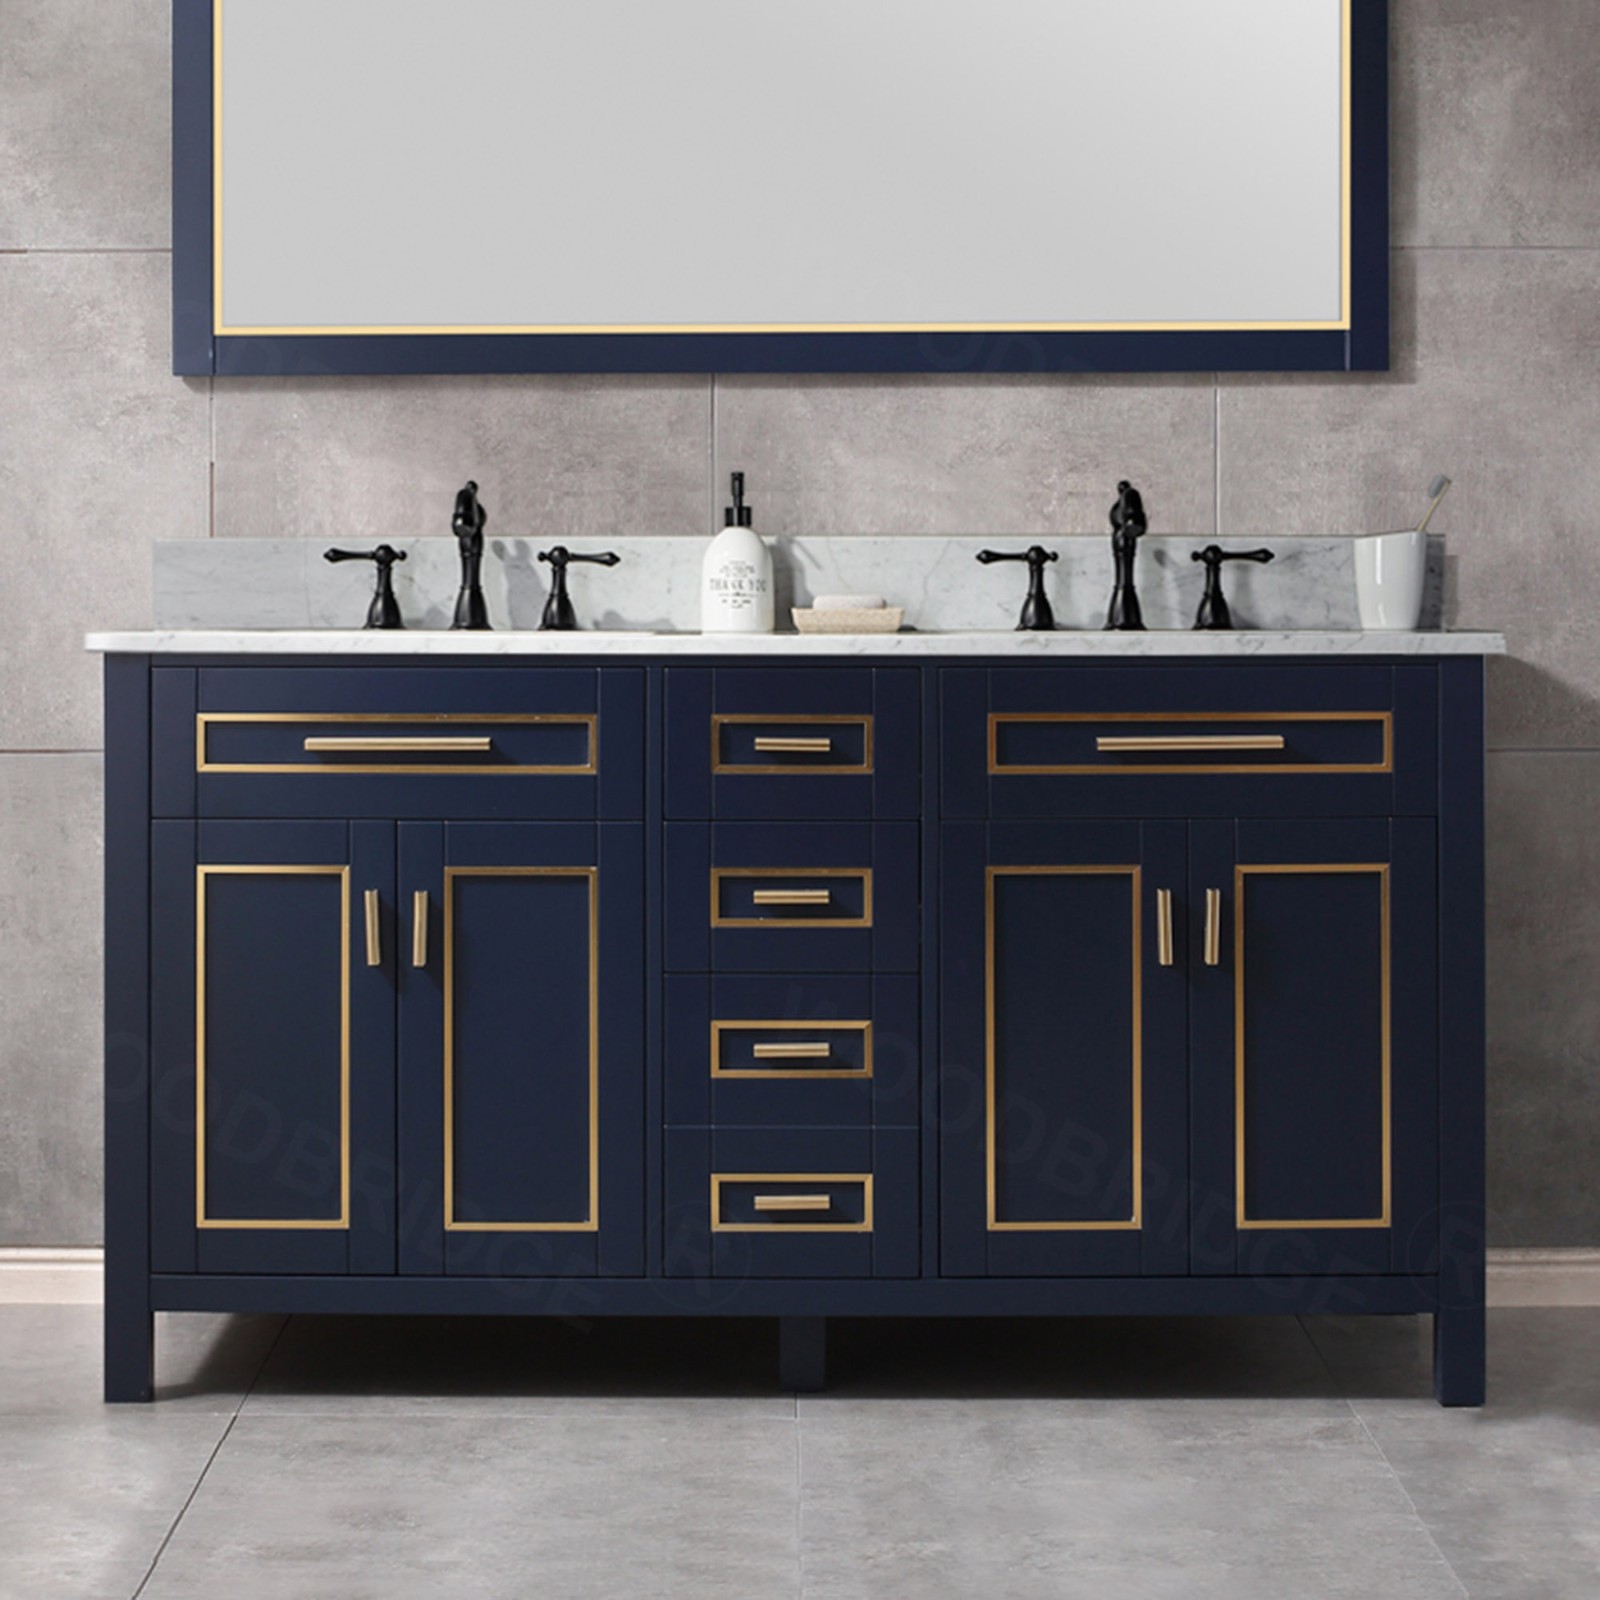  WOODBRIDGE Milan  61” Floor Mounted Single Basin Vanity Set with Solid Wood Cabinet in Navy Blue, and Carrara White Marble Vanity Top with Pre-installed Undermount Rectangle Bathroom Sink in White, Pre-Drilled 3-Hole for 8-inch Widespread Faucet_4648